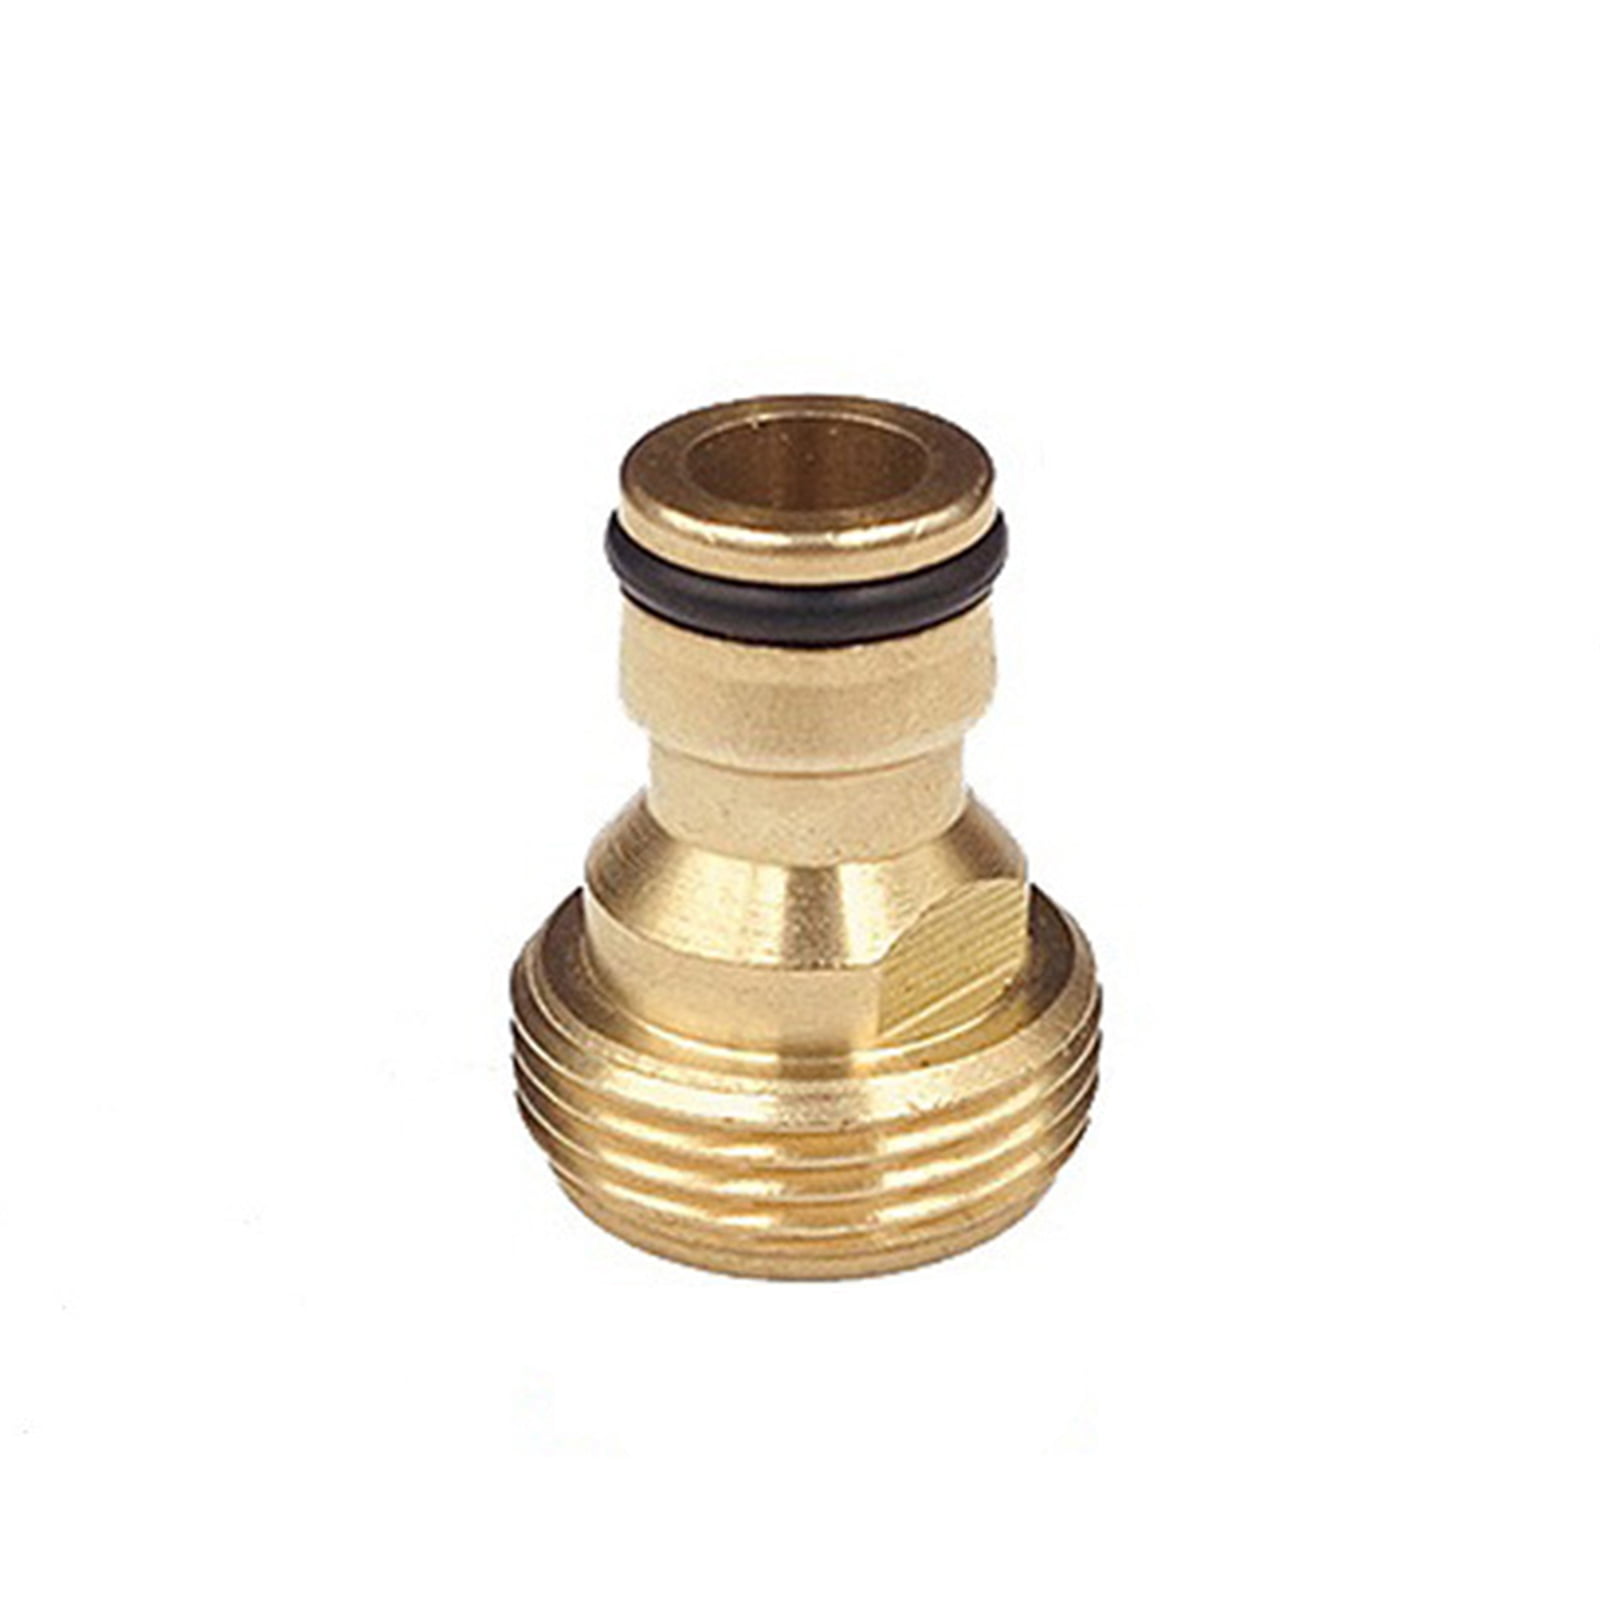 Details about   1 Pc 25mm Hose Quick Connector Tap Garden Irrigation Car Washing Watering Pipes 